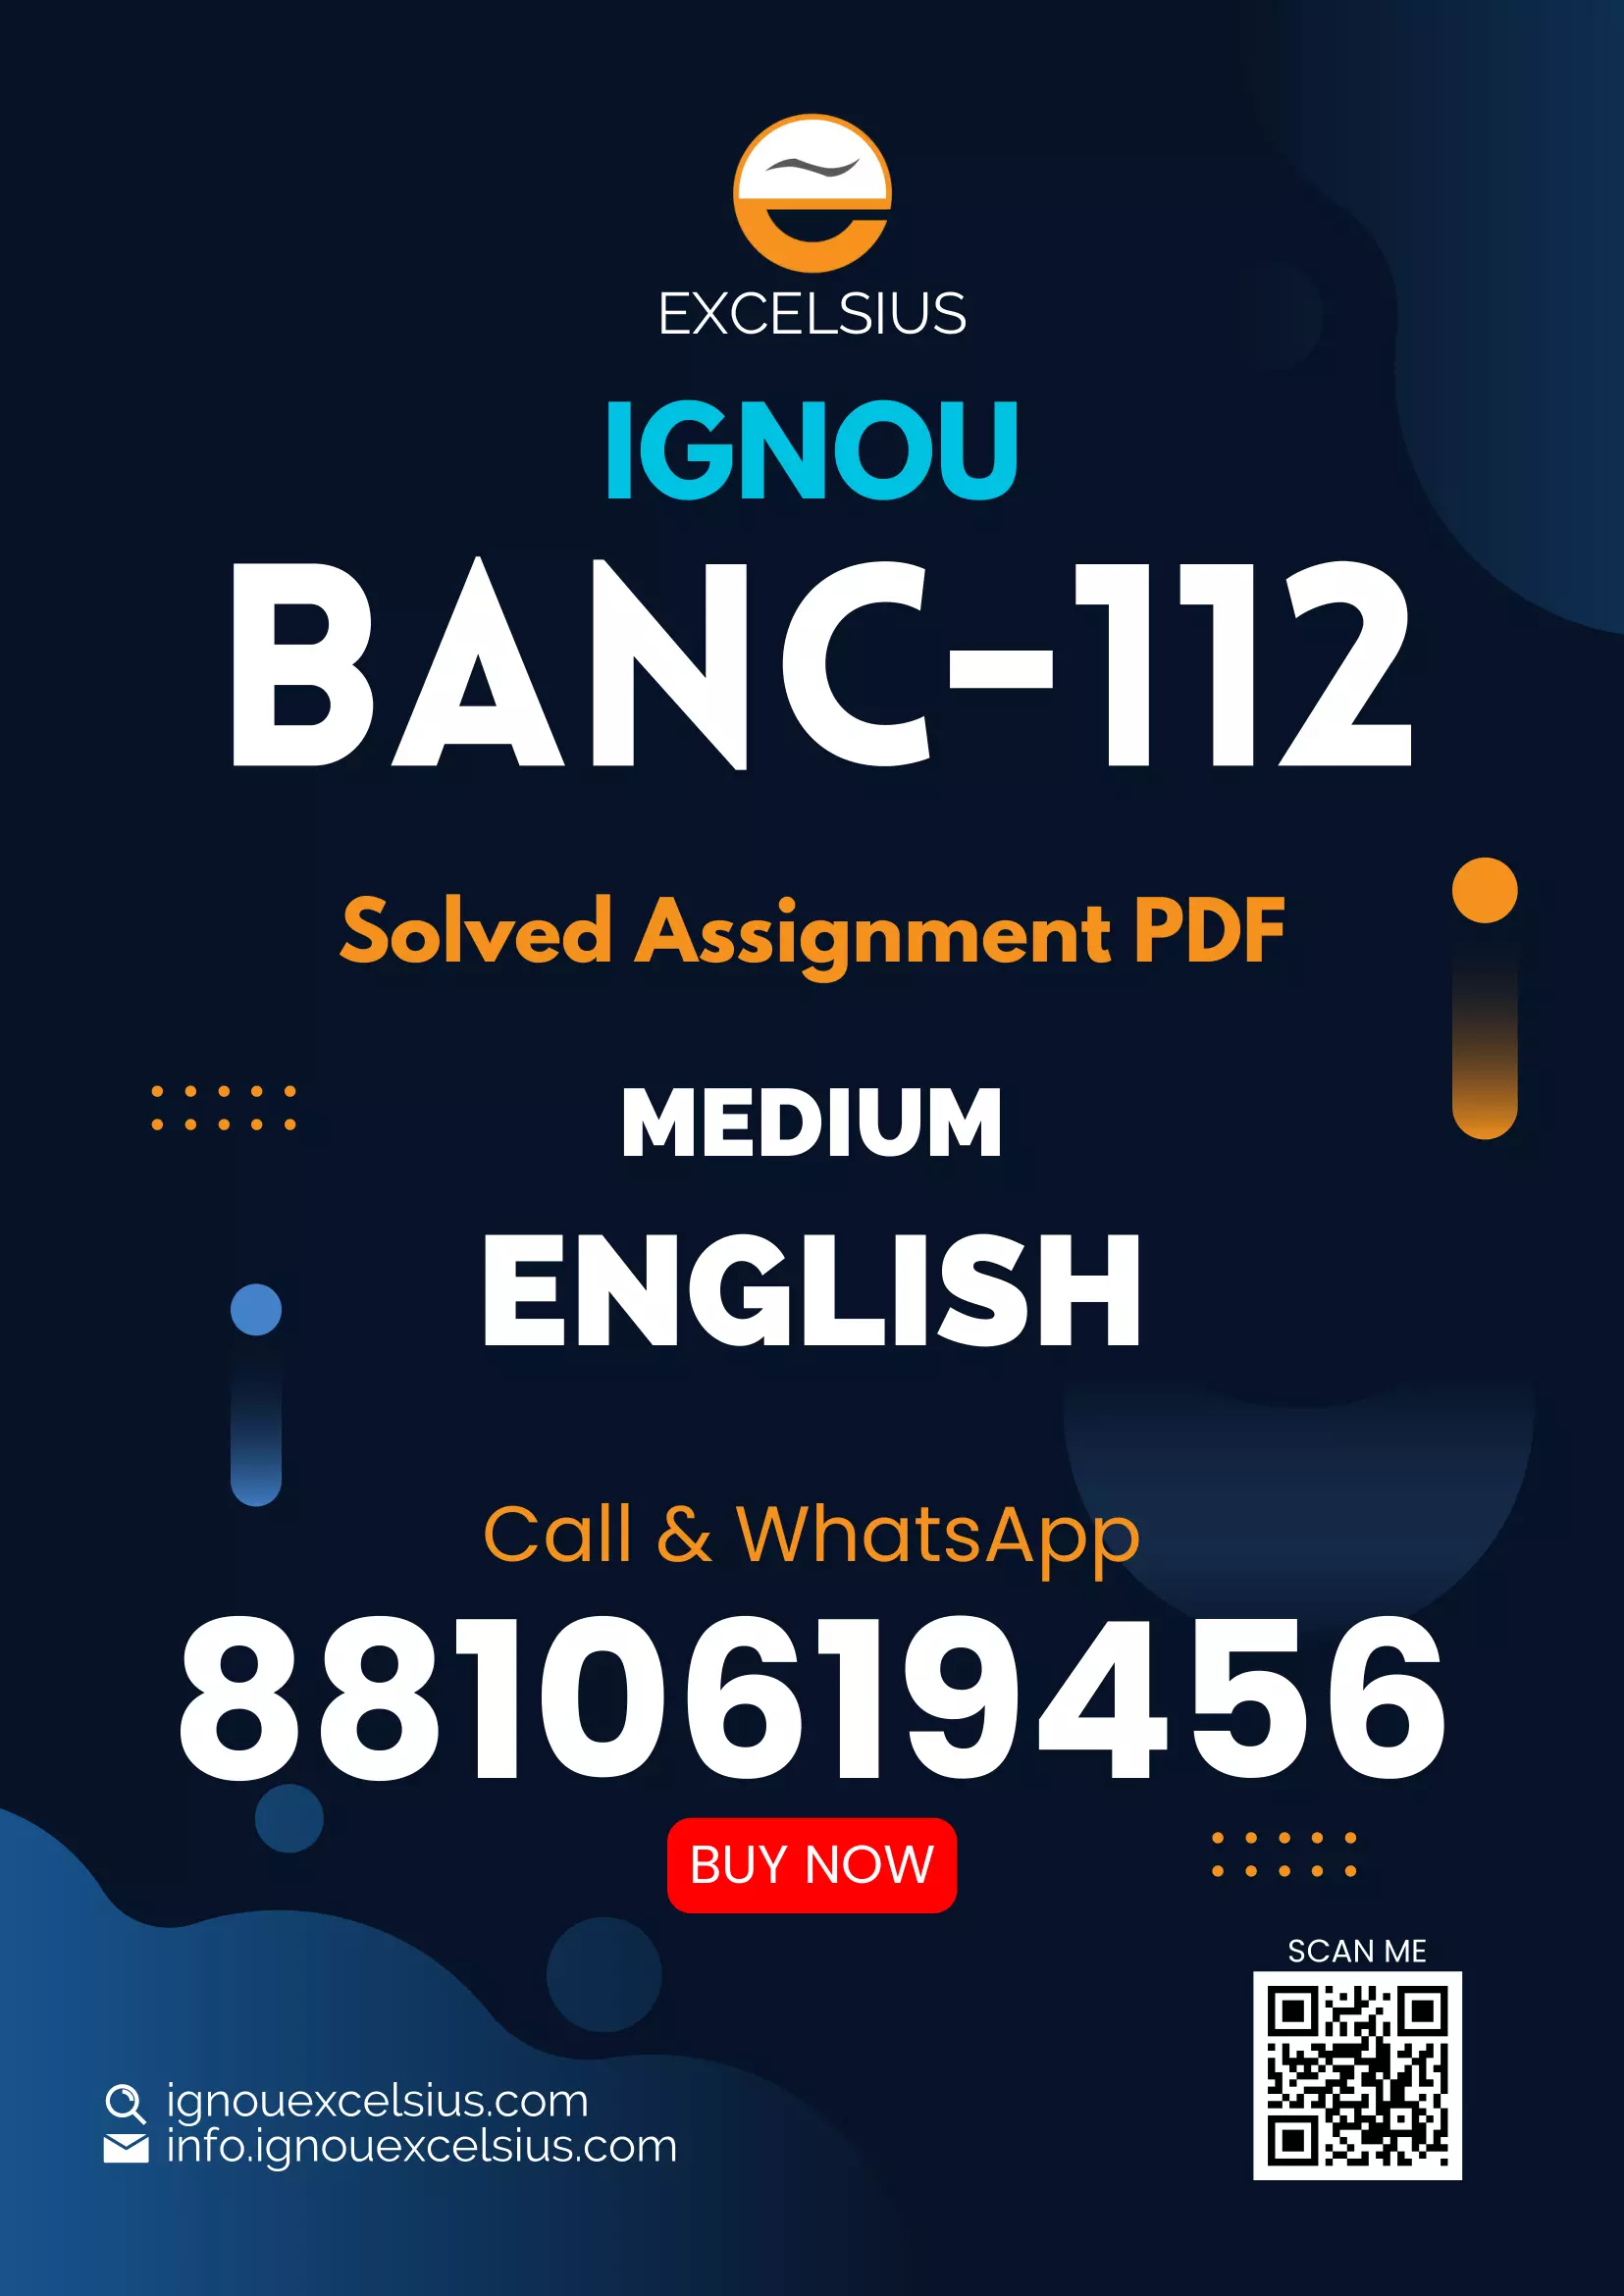 IGNOU BANC-112 - Anthropology in Practice, Latest Solved Assignment-July 2022 – January 2023